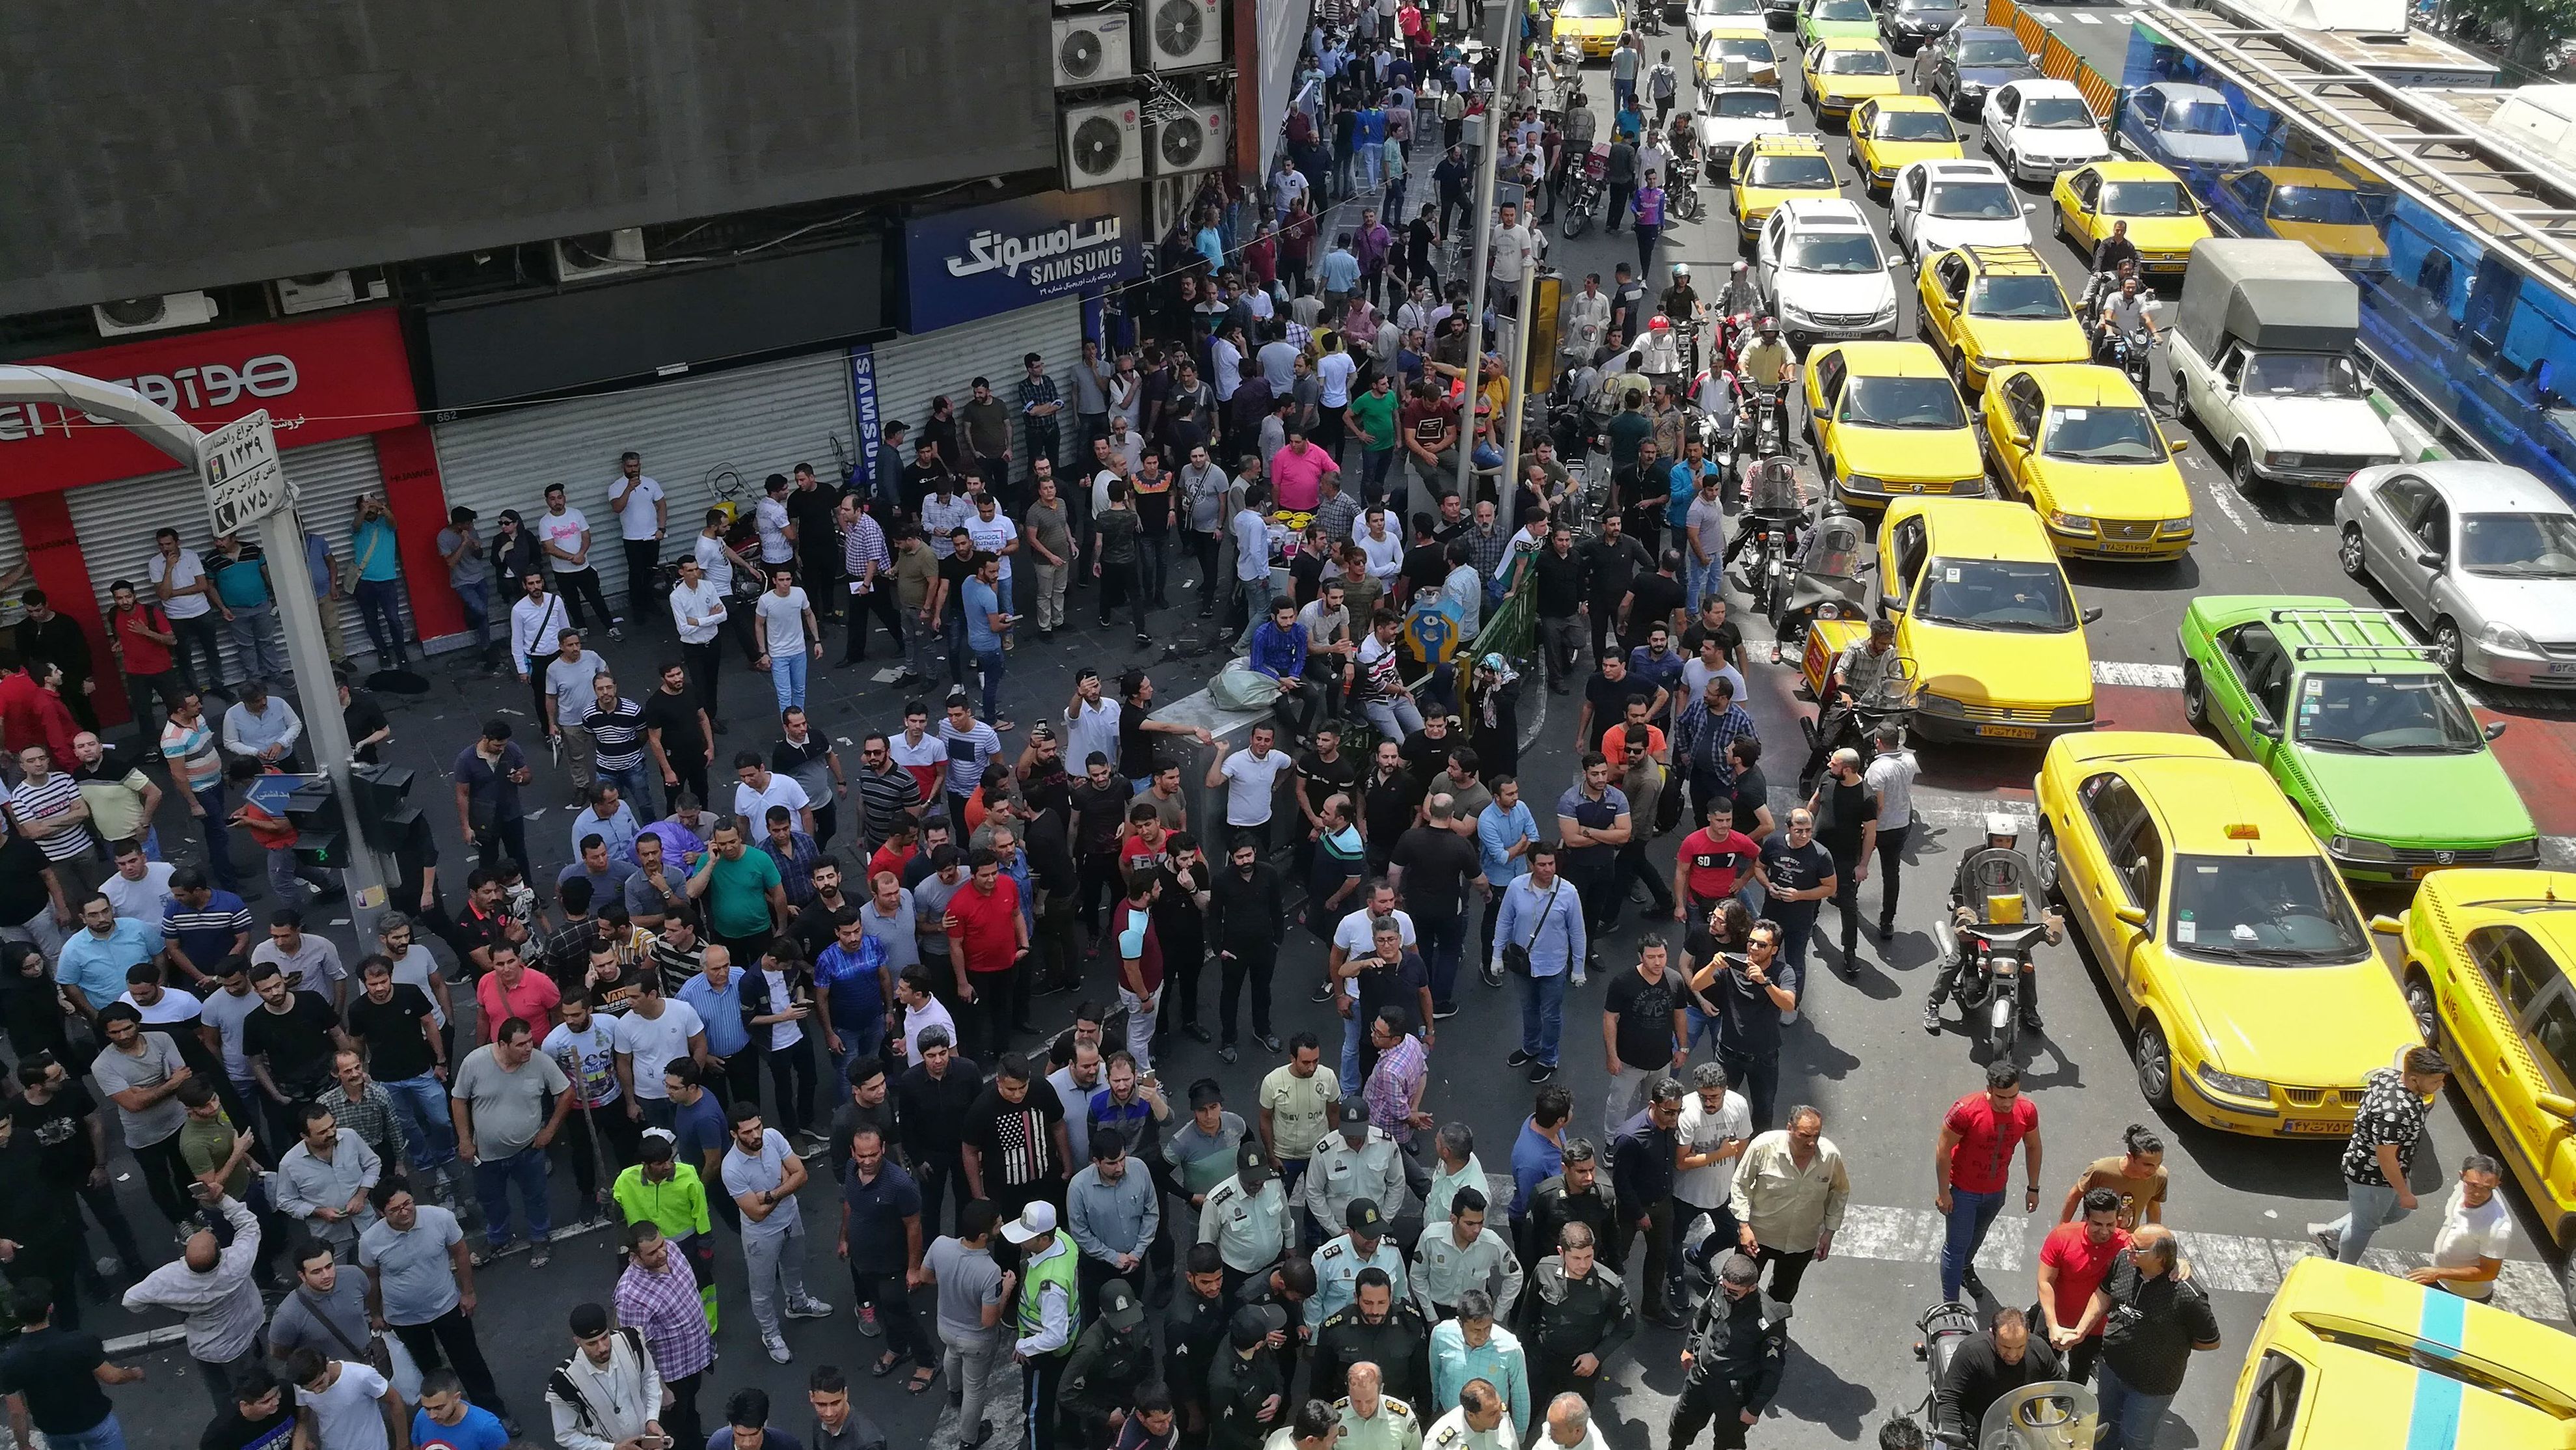 Iranian protesters gather during a demonstration in central Tehran on June 25, 2018.